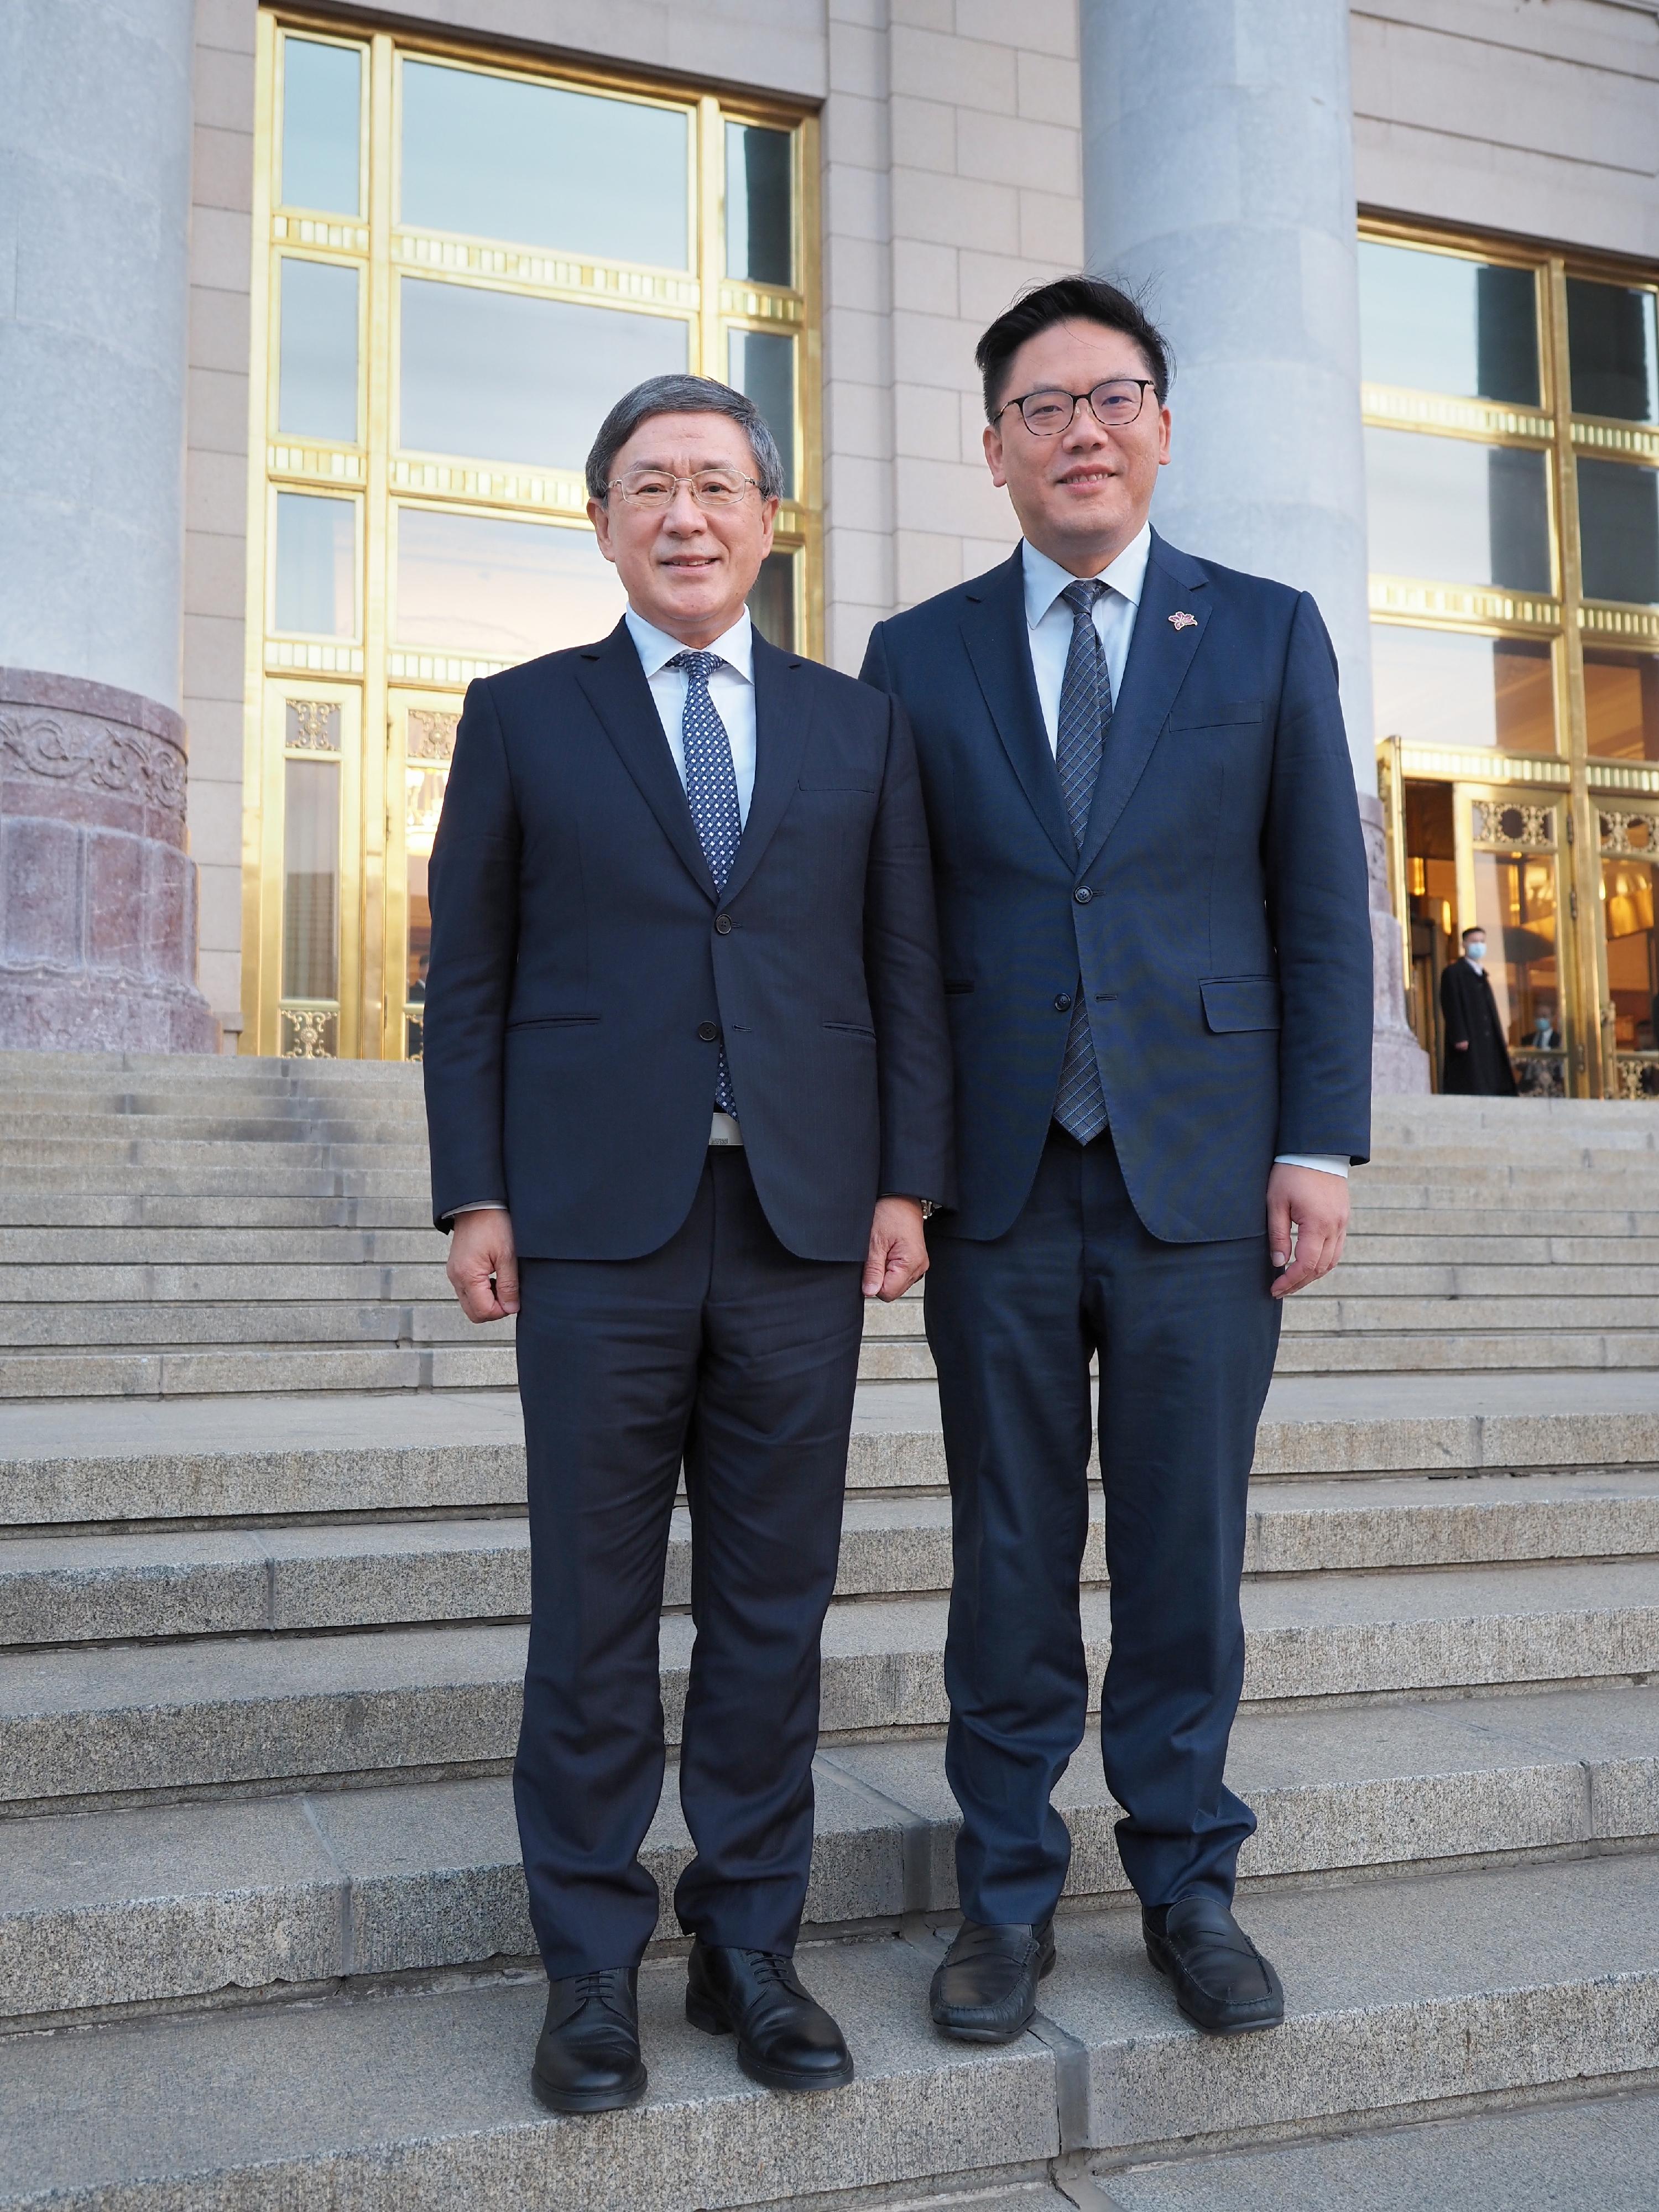 The Deputy Chief Secretary for Administration, Mr Cheuk Wing-hing (left), and the Under Secretary for Home and Youth Affairs, Mr Clarence Leung (right), attend an exchange session of a youth delegation to the Mainland comprising youth representatives from Hong Kong and Macao today (November 22) at the Great Hall of the People in Beijing.